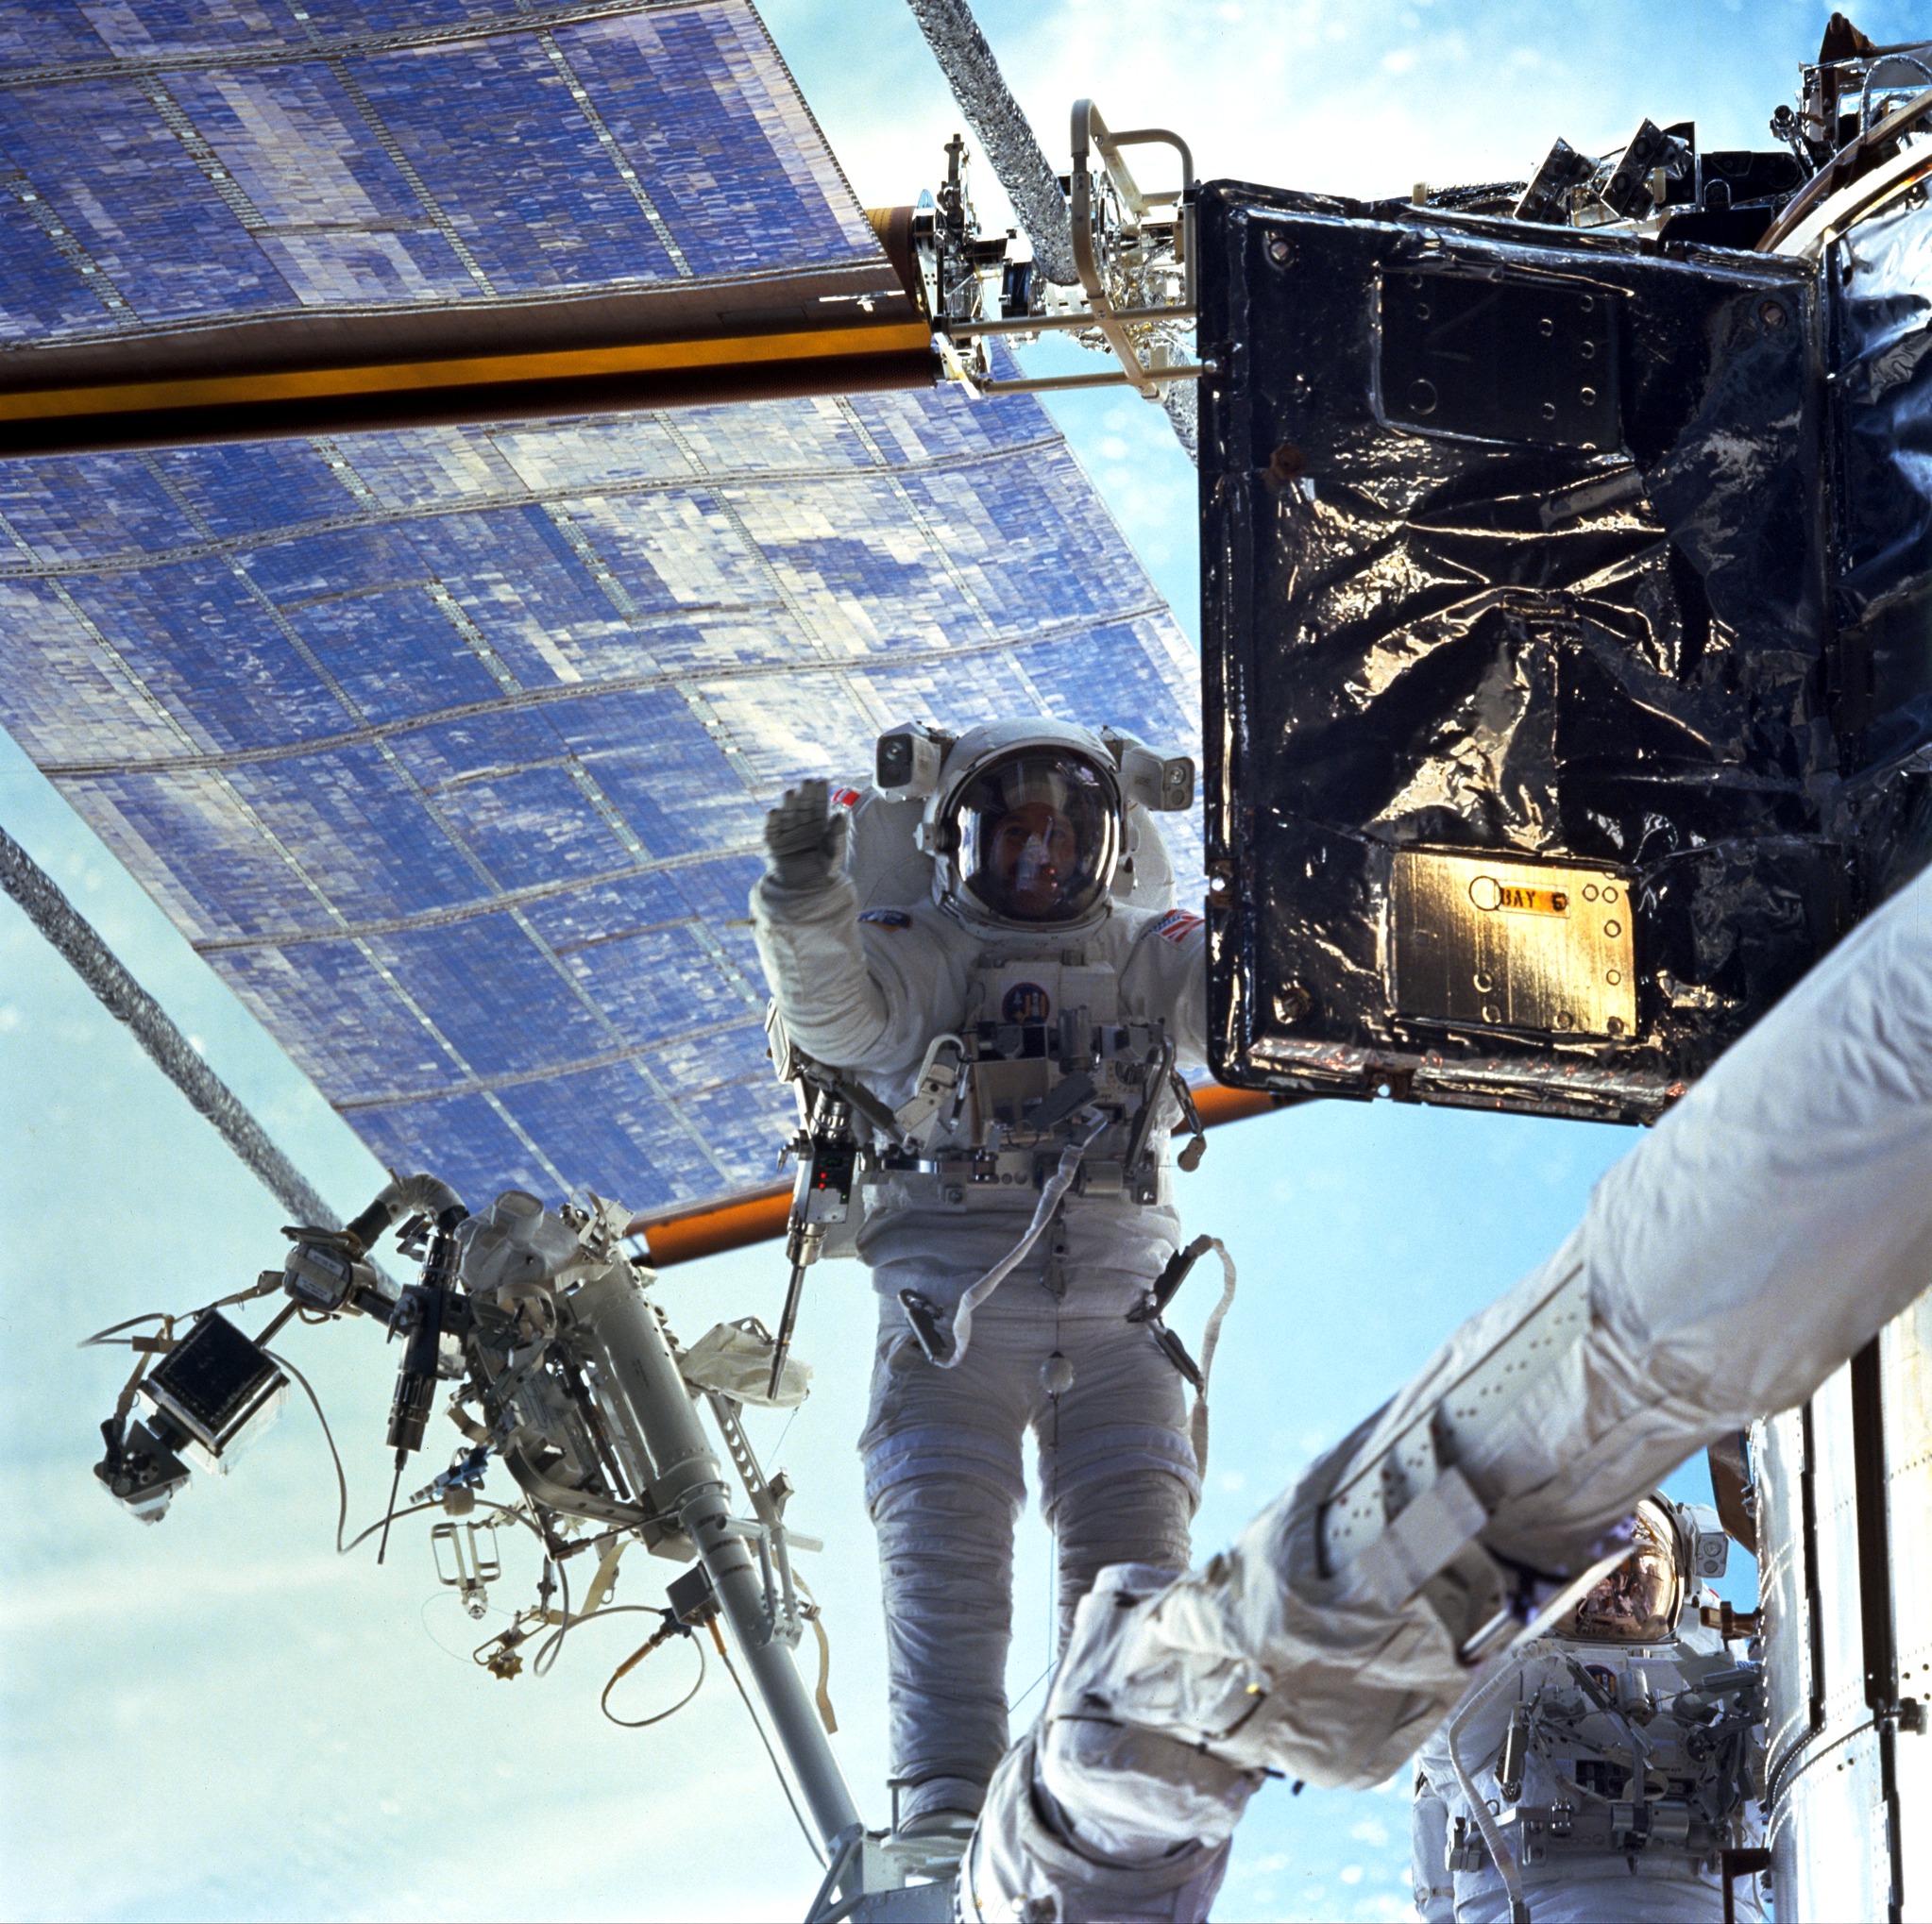 An astronaut on the end of the robotic arm opens an equipment door on Hubble. The solar array and the blue earth are in the background.